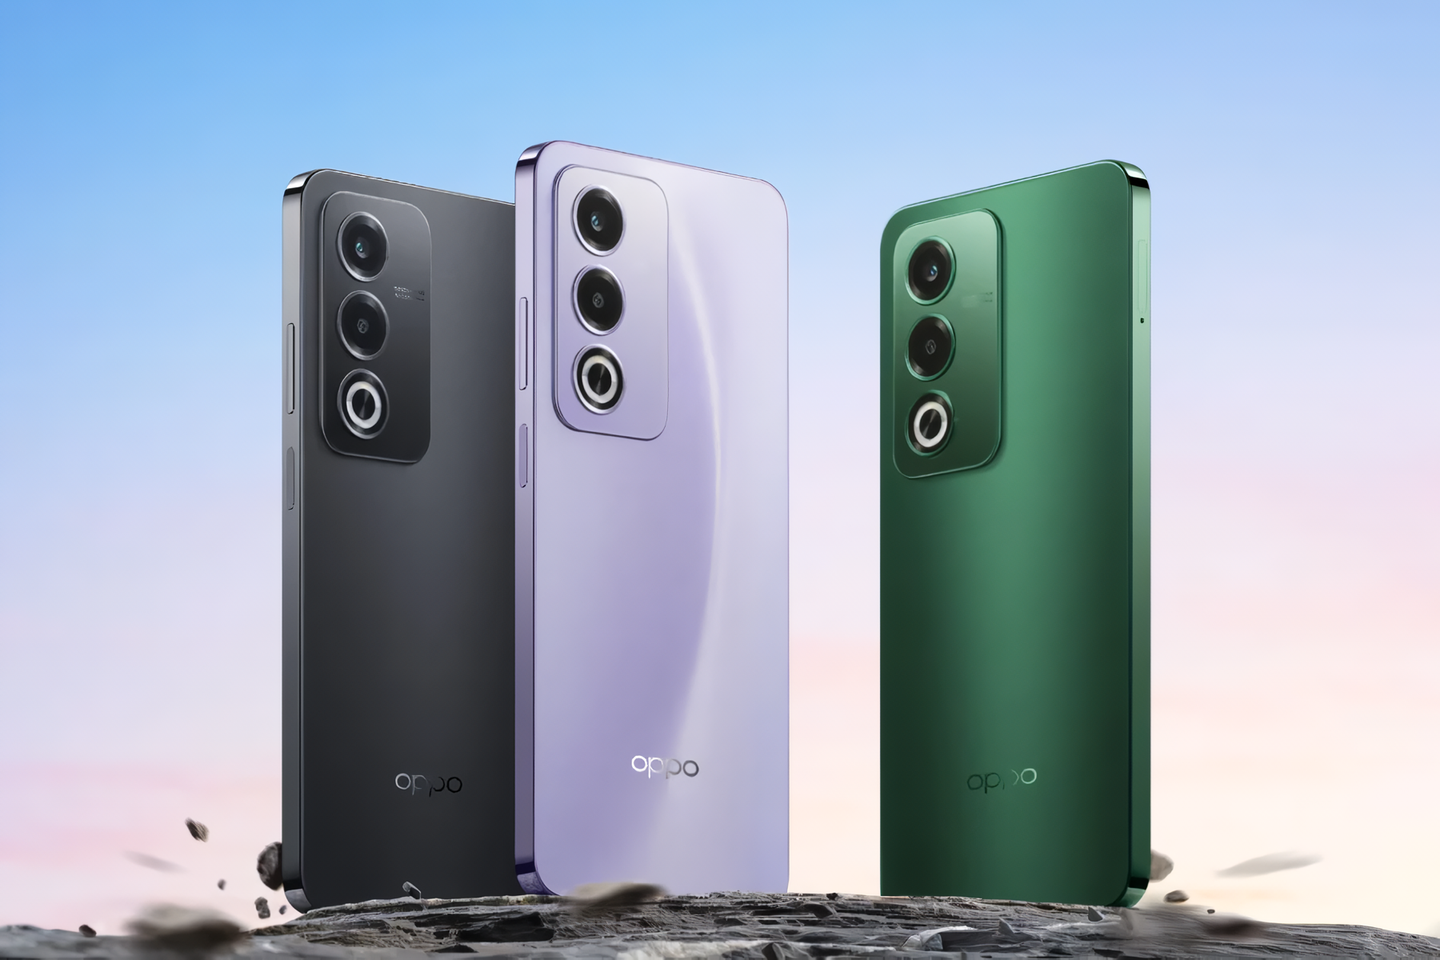 Oppo has unveiled a new A3 Energy Edition smartphone with a focus on high battery life and durability